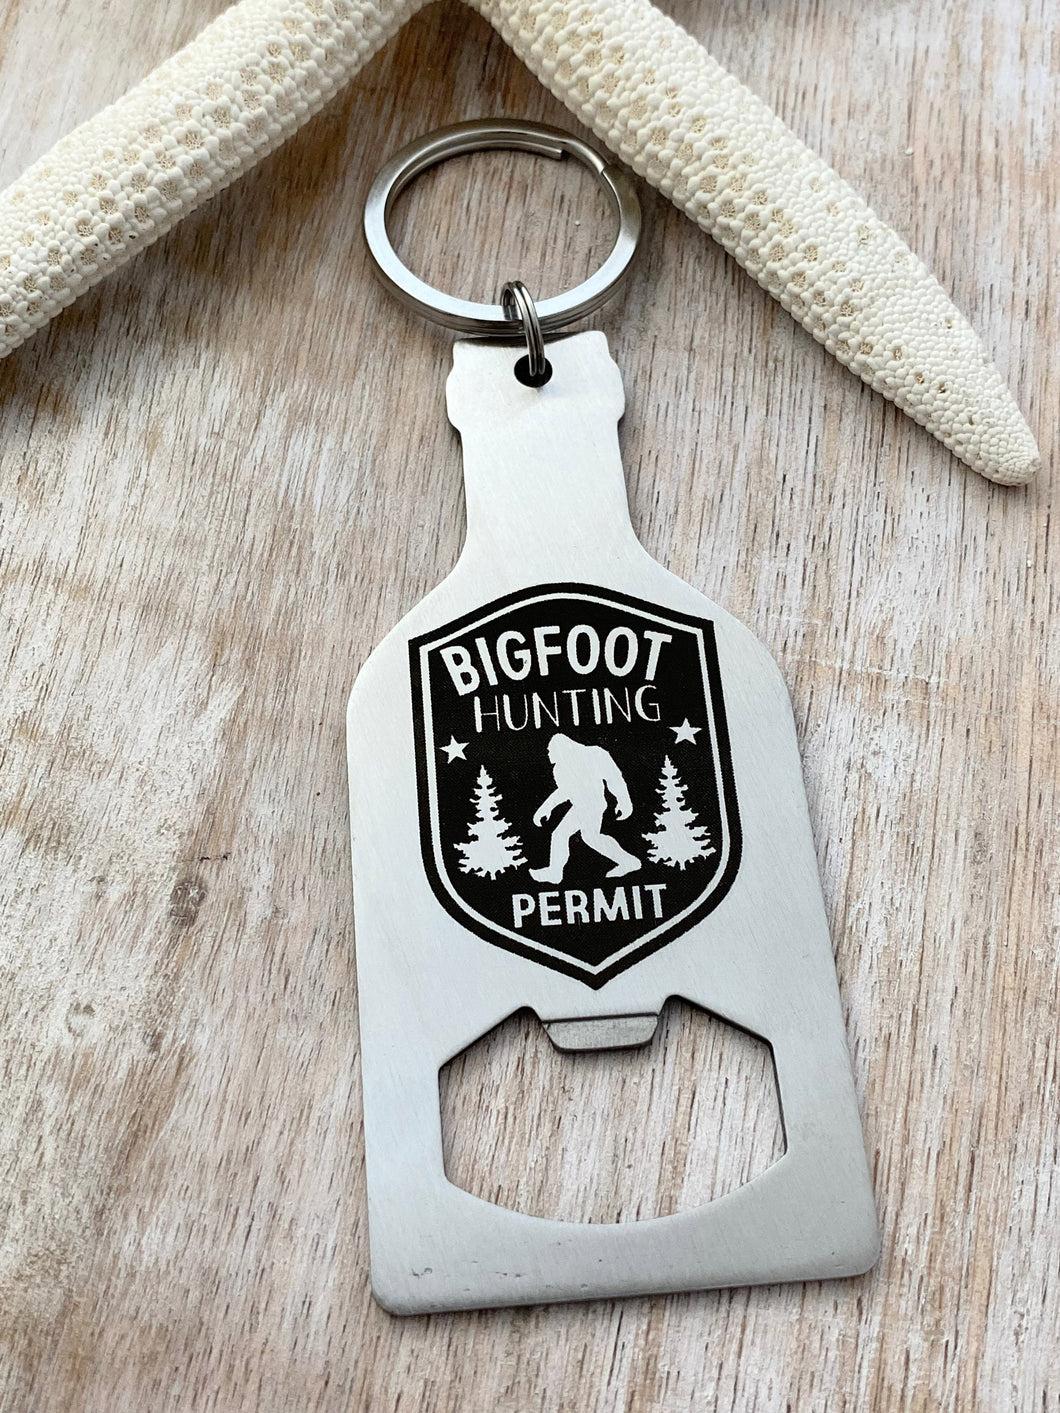 Bigfoot hunting permit - stainless steel beer bottle opener keychain - gift for him  -  key ring  gift for Sasquatch enthusiast